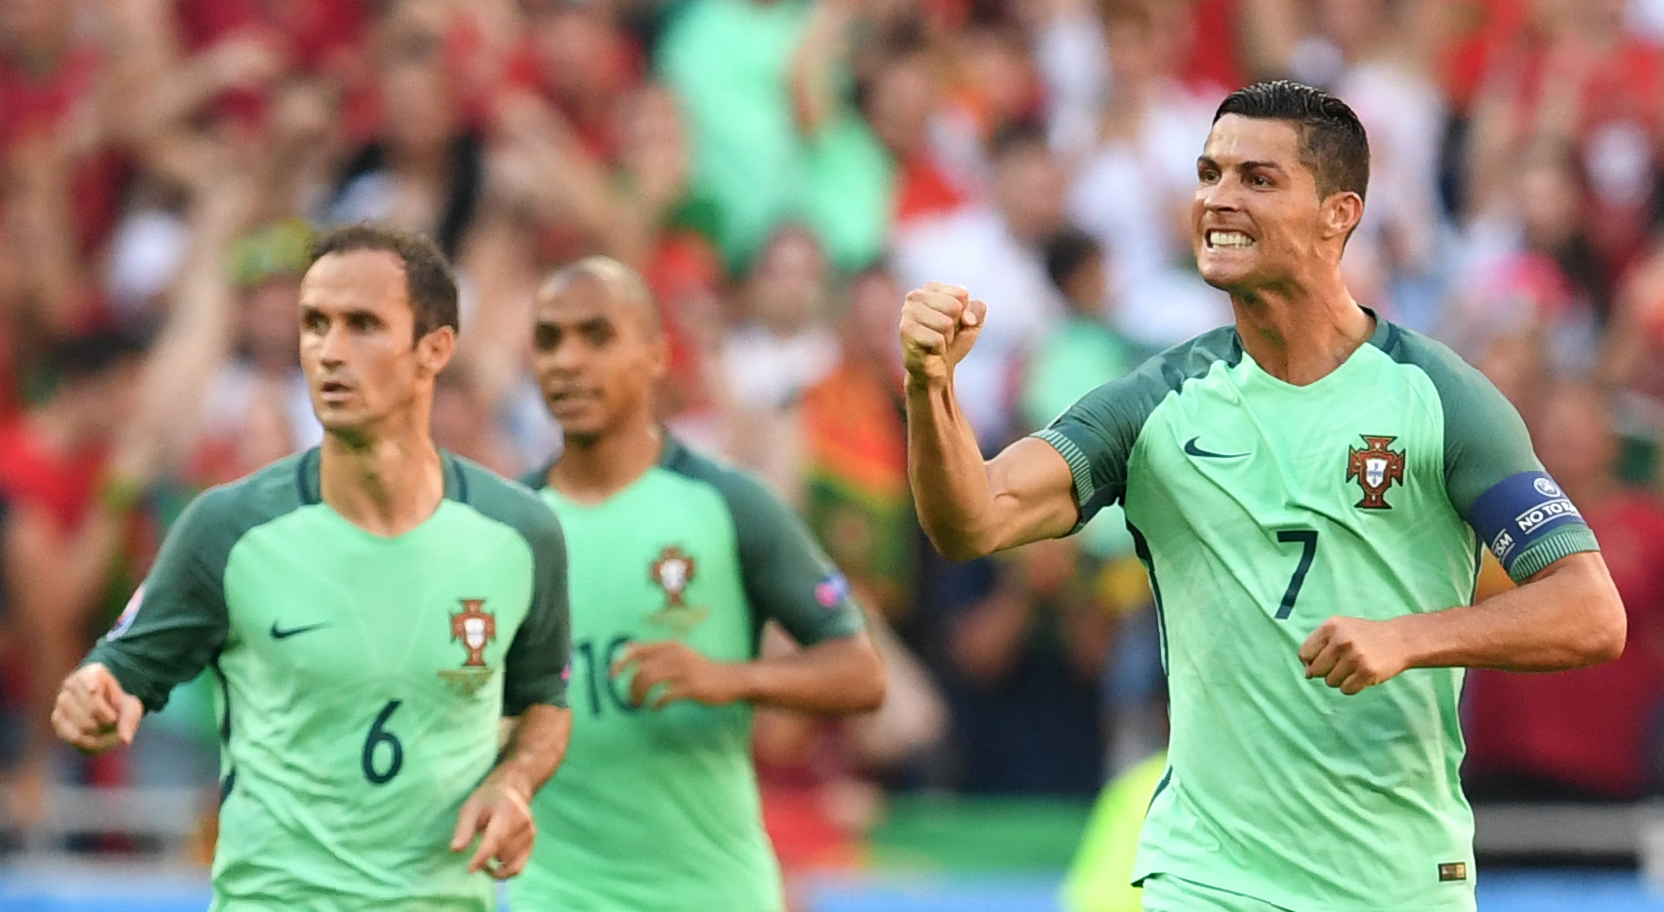 Portugal's forward Cristiano Ronaldo (R) celebrates after scoring a goal during the Euro 2016 group F football match between Hungary and Portugal at the Parc Olympique Lyonnais stadium in Decines-Charpieu, near Lyon, on June 22, 2016. / AFP / FRANCISCO LEONG        (Photo credit should read FRANCISCO LEONG/AFP/Getty Images)